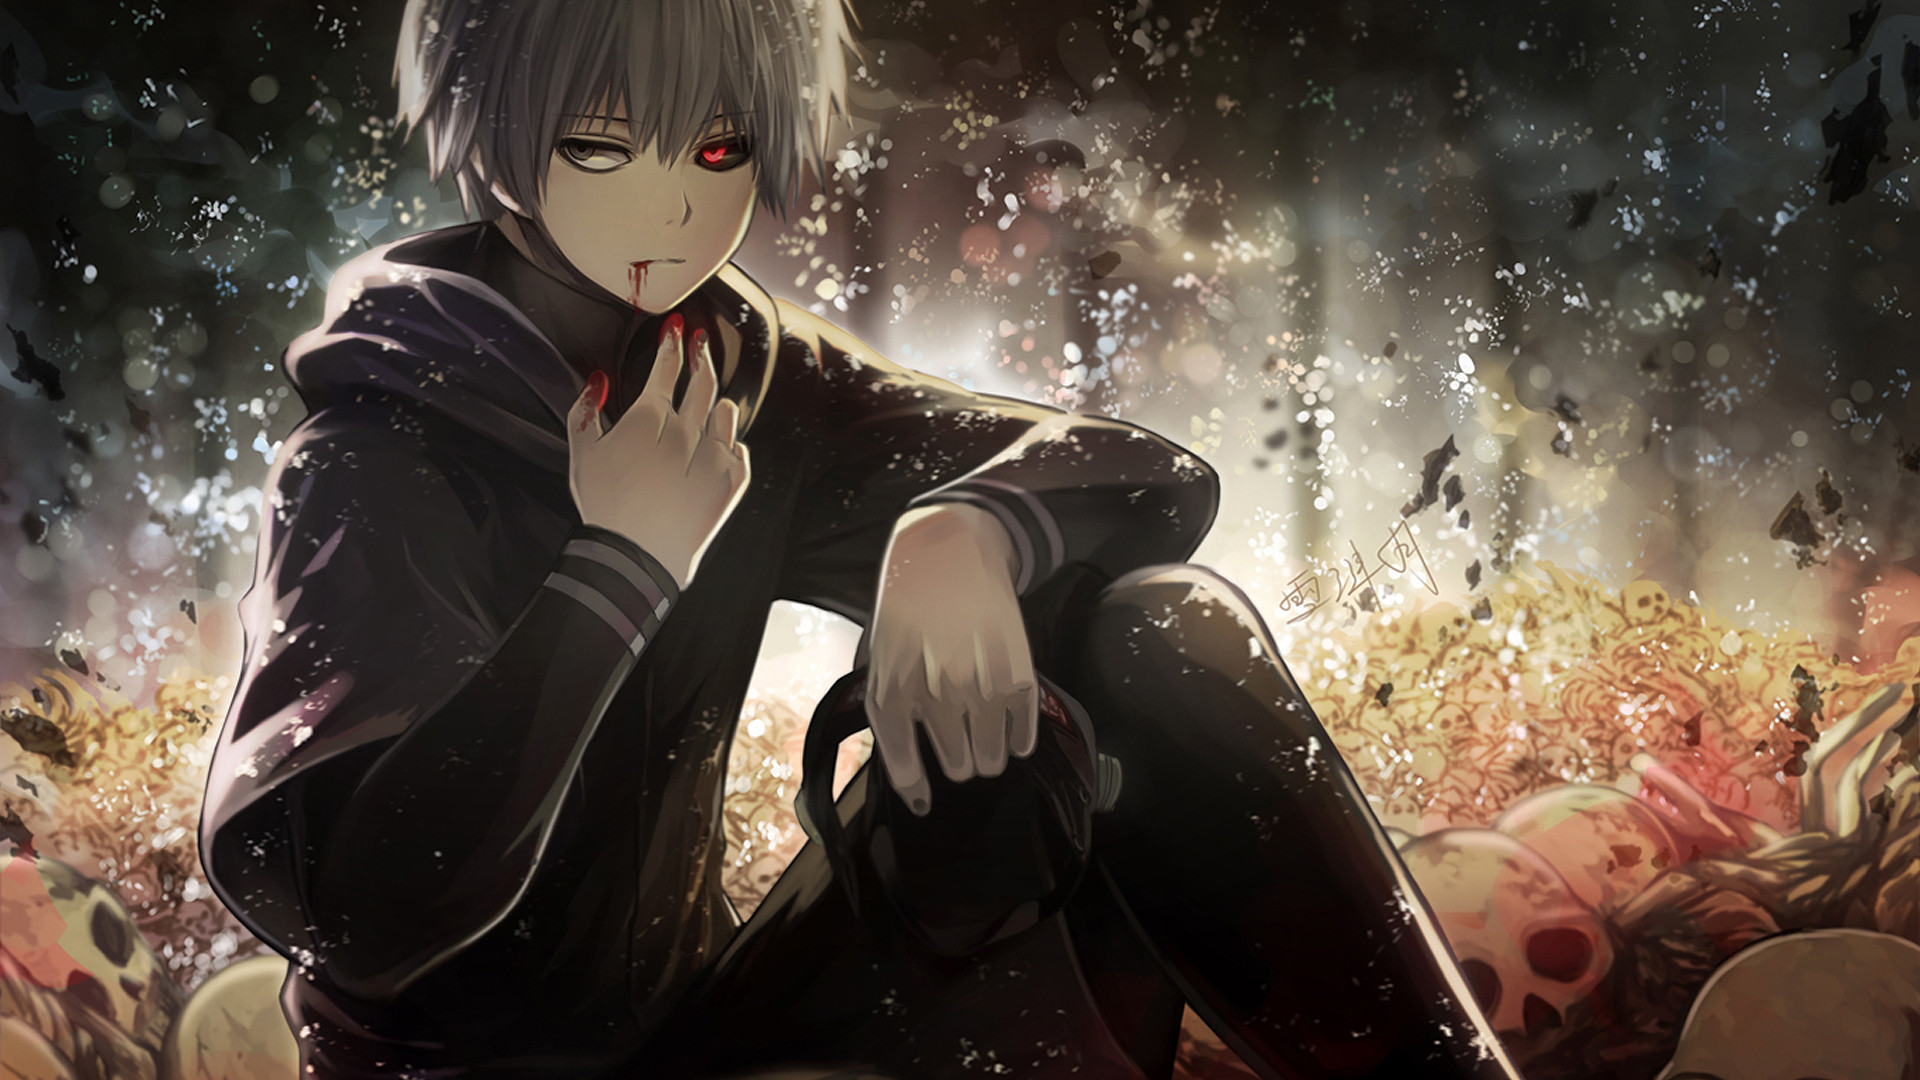 Tokyo Ghoul HD Wallpapers and Backgrounds 19201080 Ghoul Wallpapers 32 Wallpapers